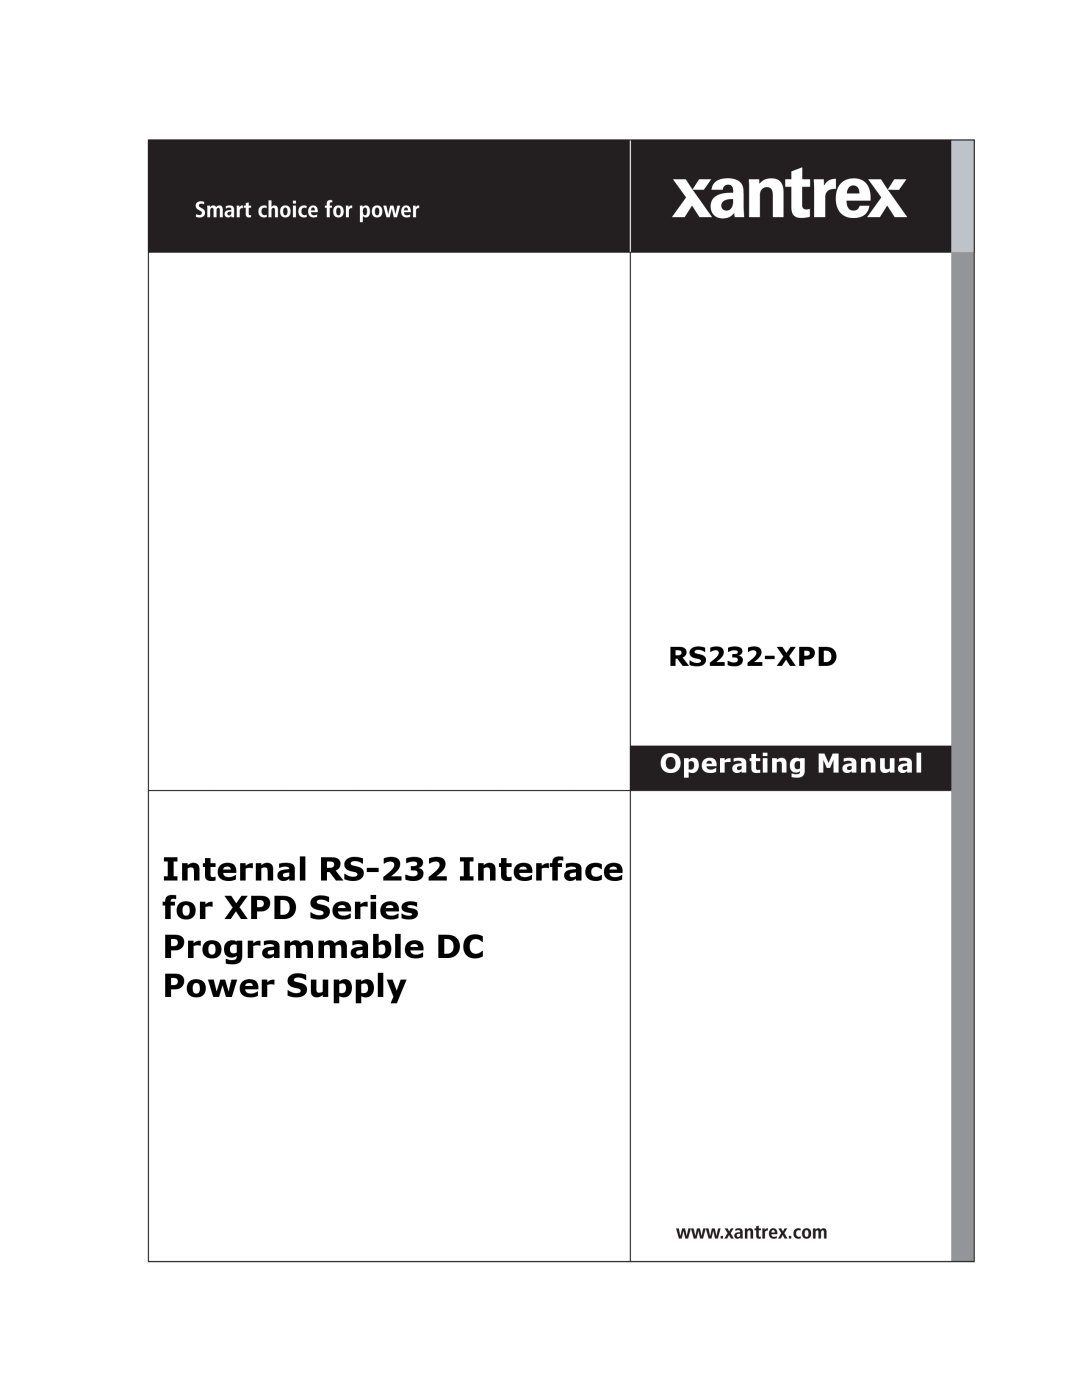 Xantrex Technology RS232-XPD manual Internal RS-232 Interface for XPD Series Programmable DC Power Supply 